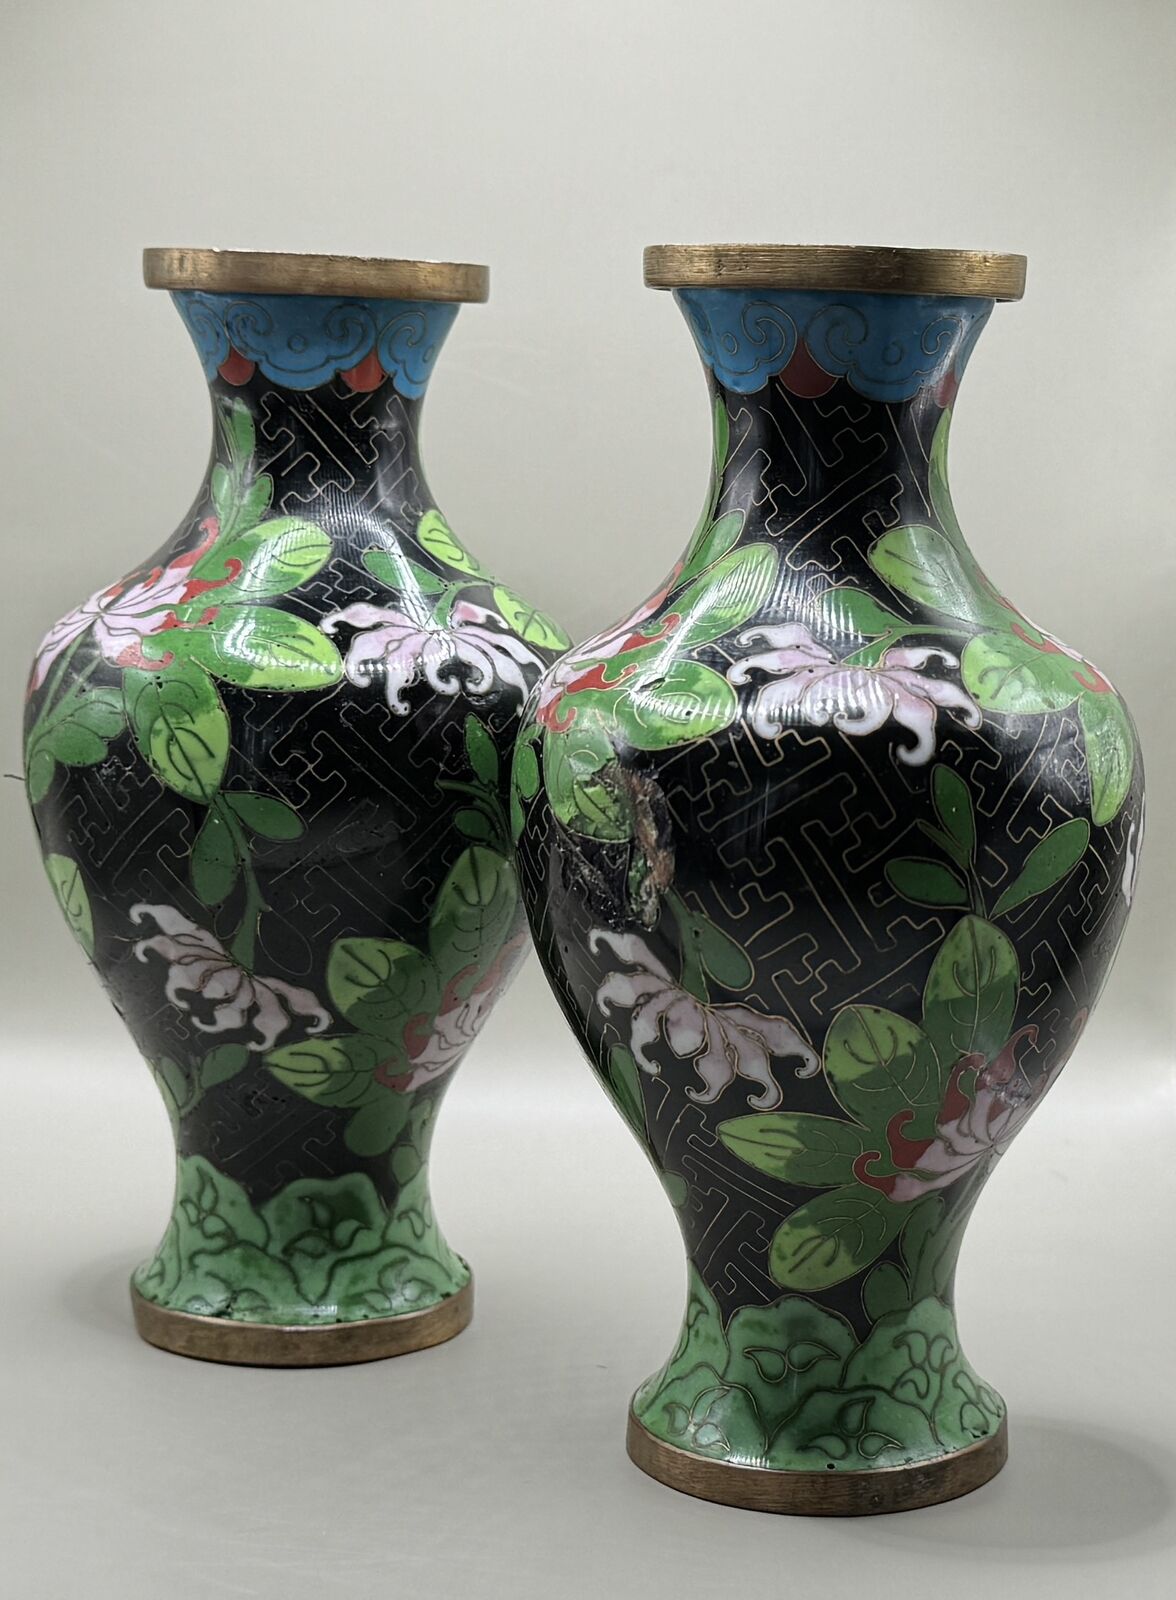 Pair of Vintage Chinese Cloisonné Vases with Floral and Fauna Motifs